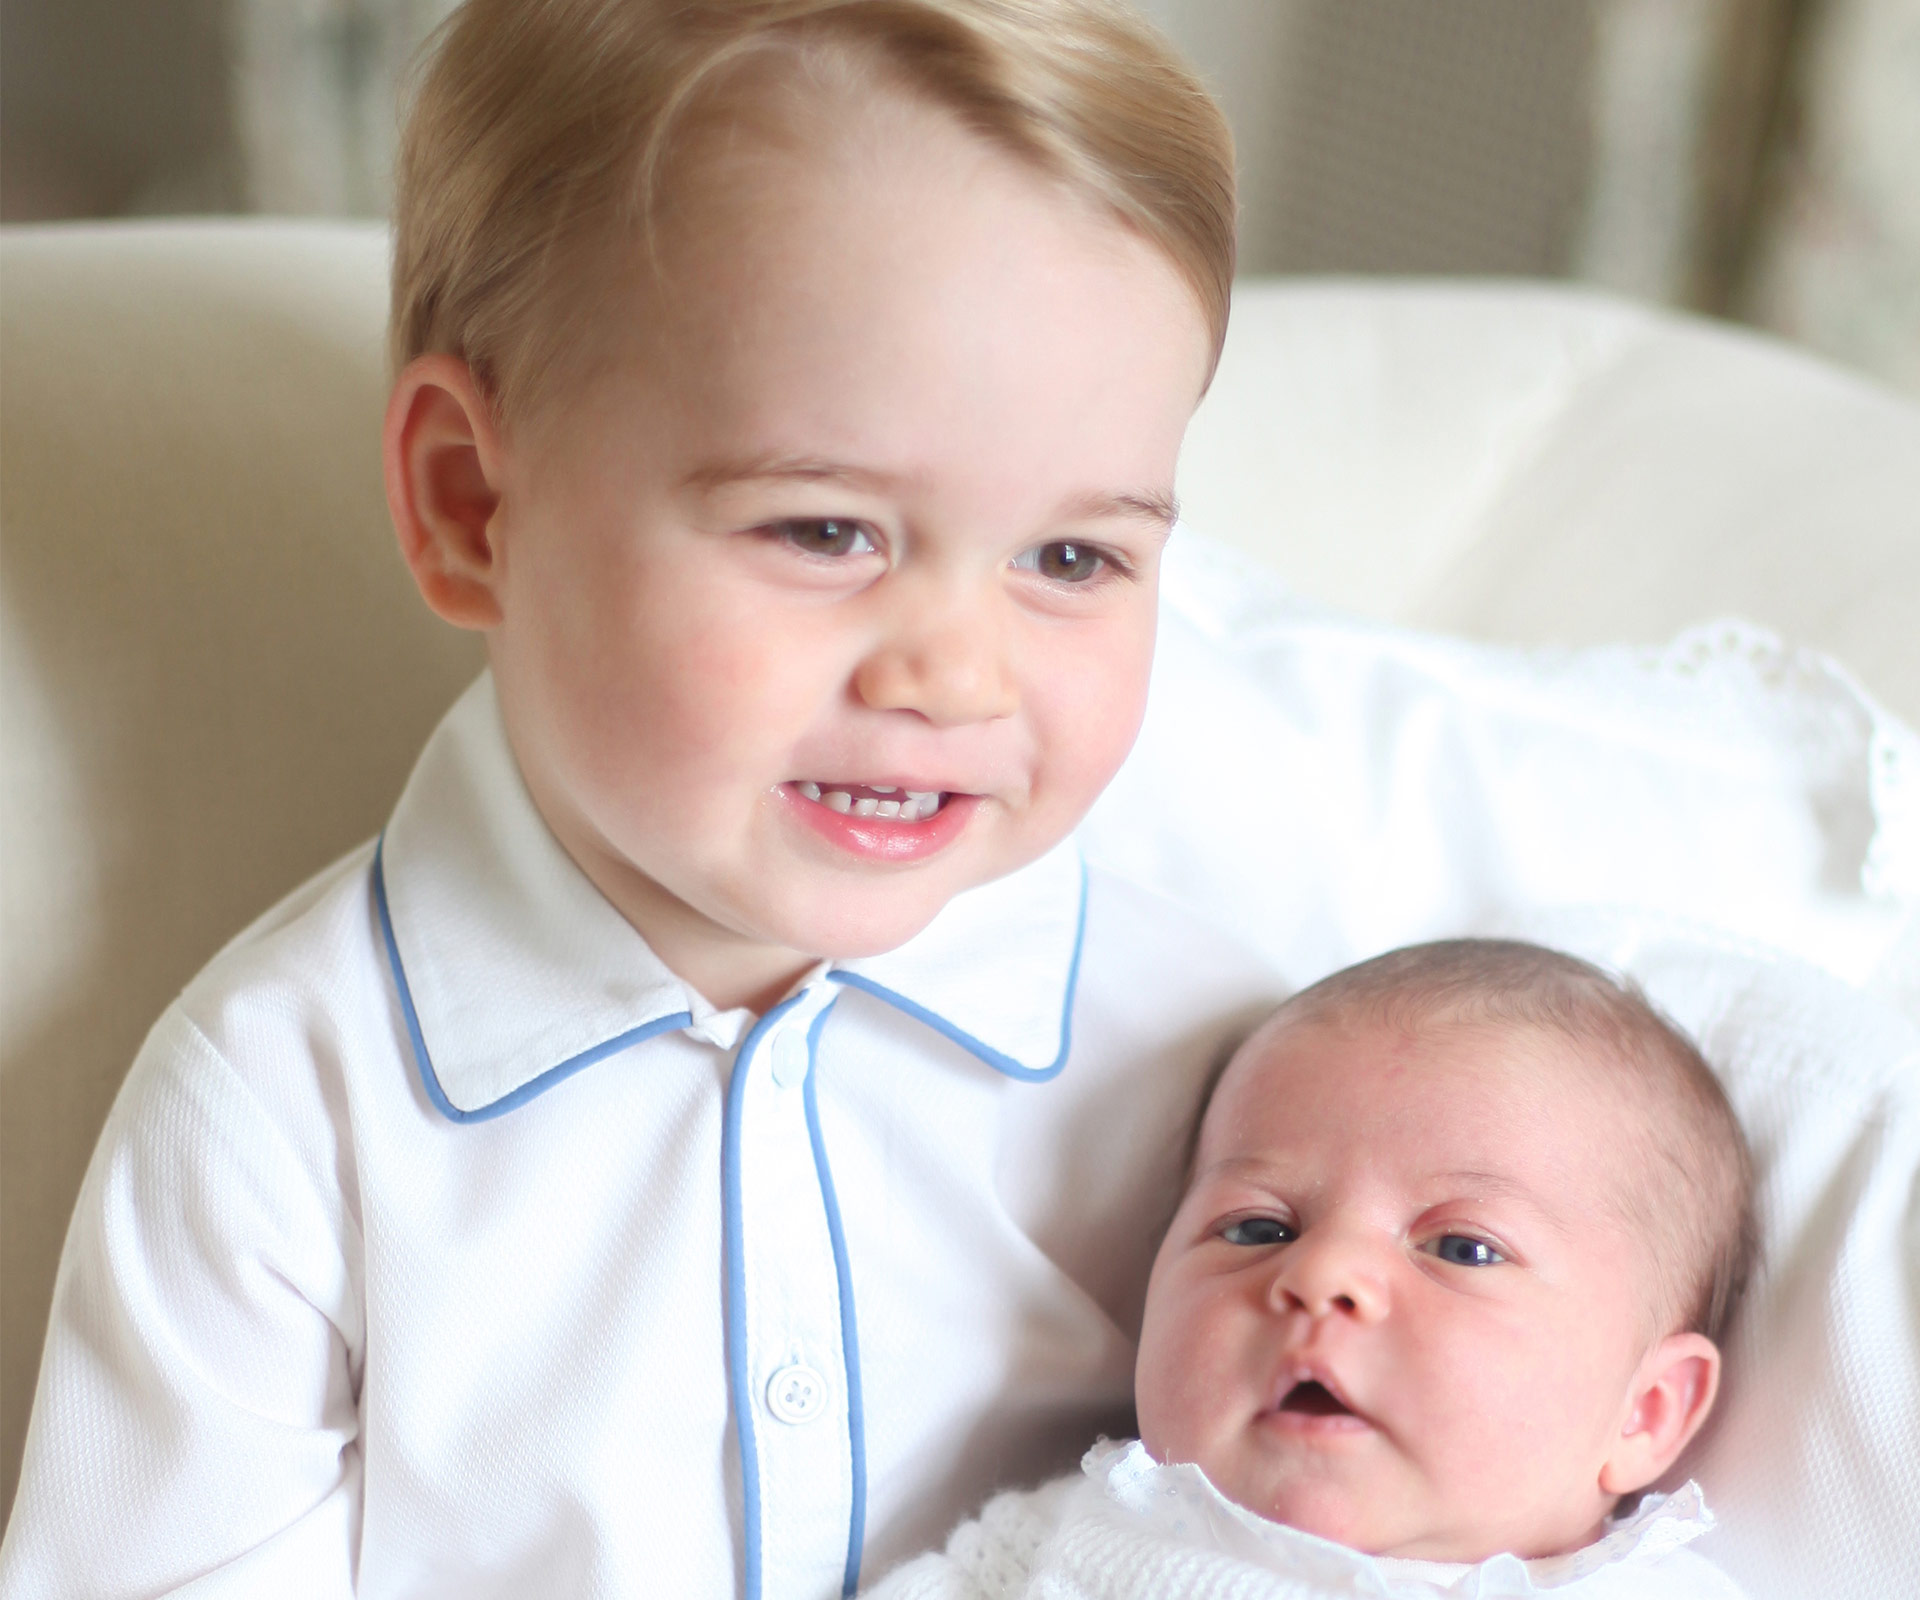 The palace prepares for Princess Charlotte's first Christmas